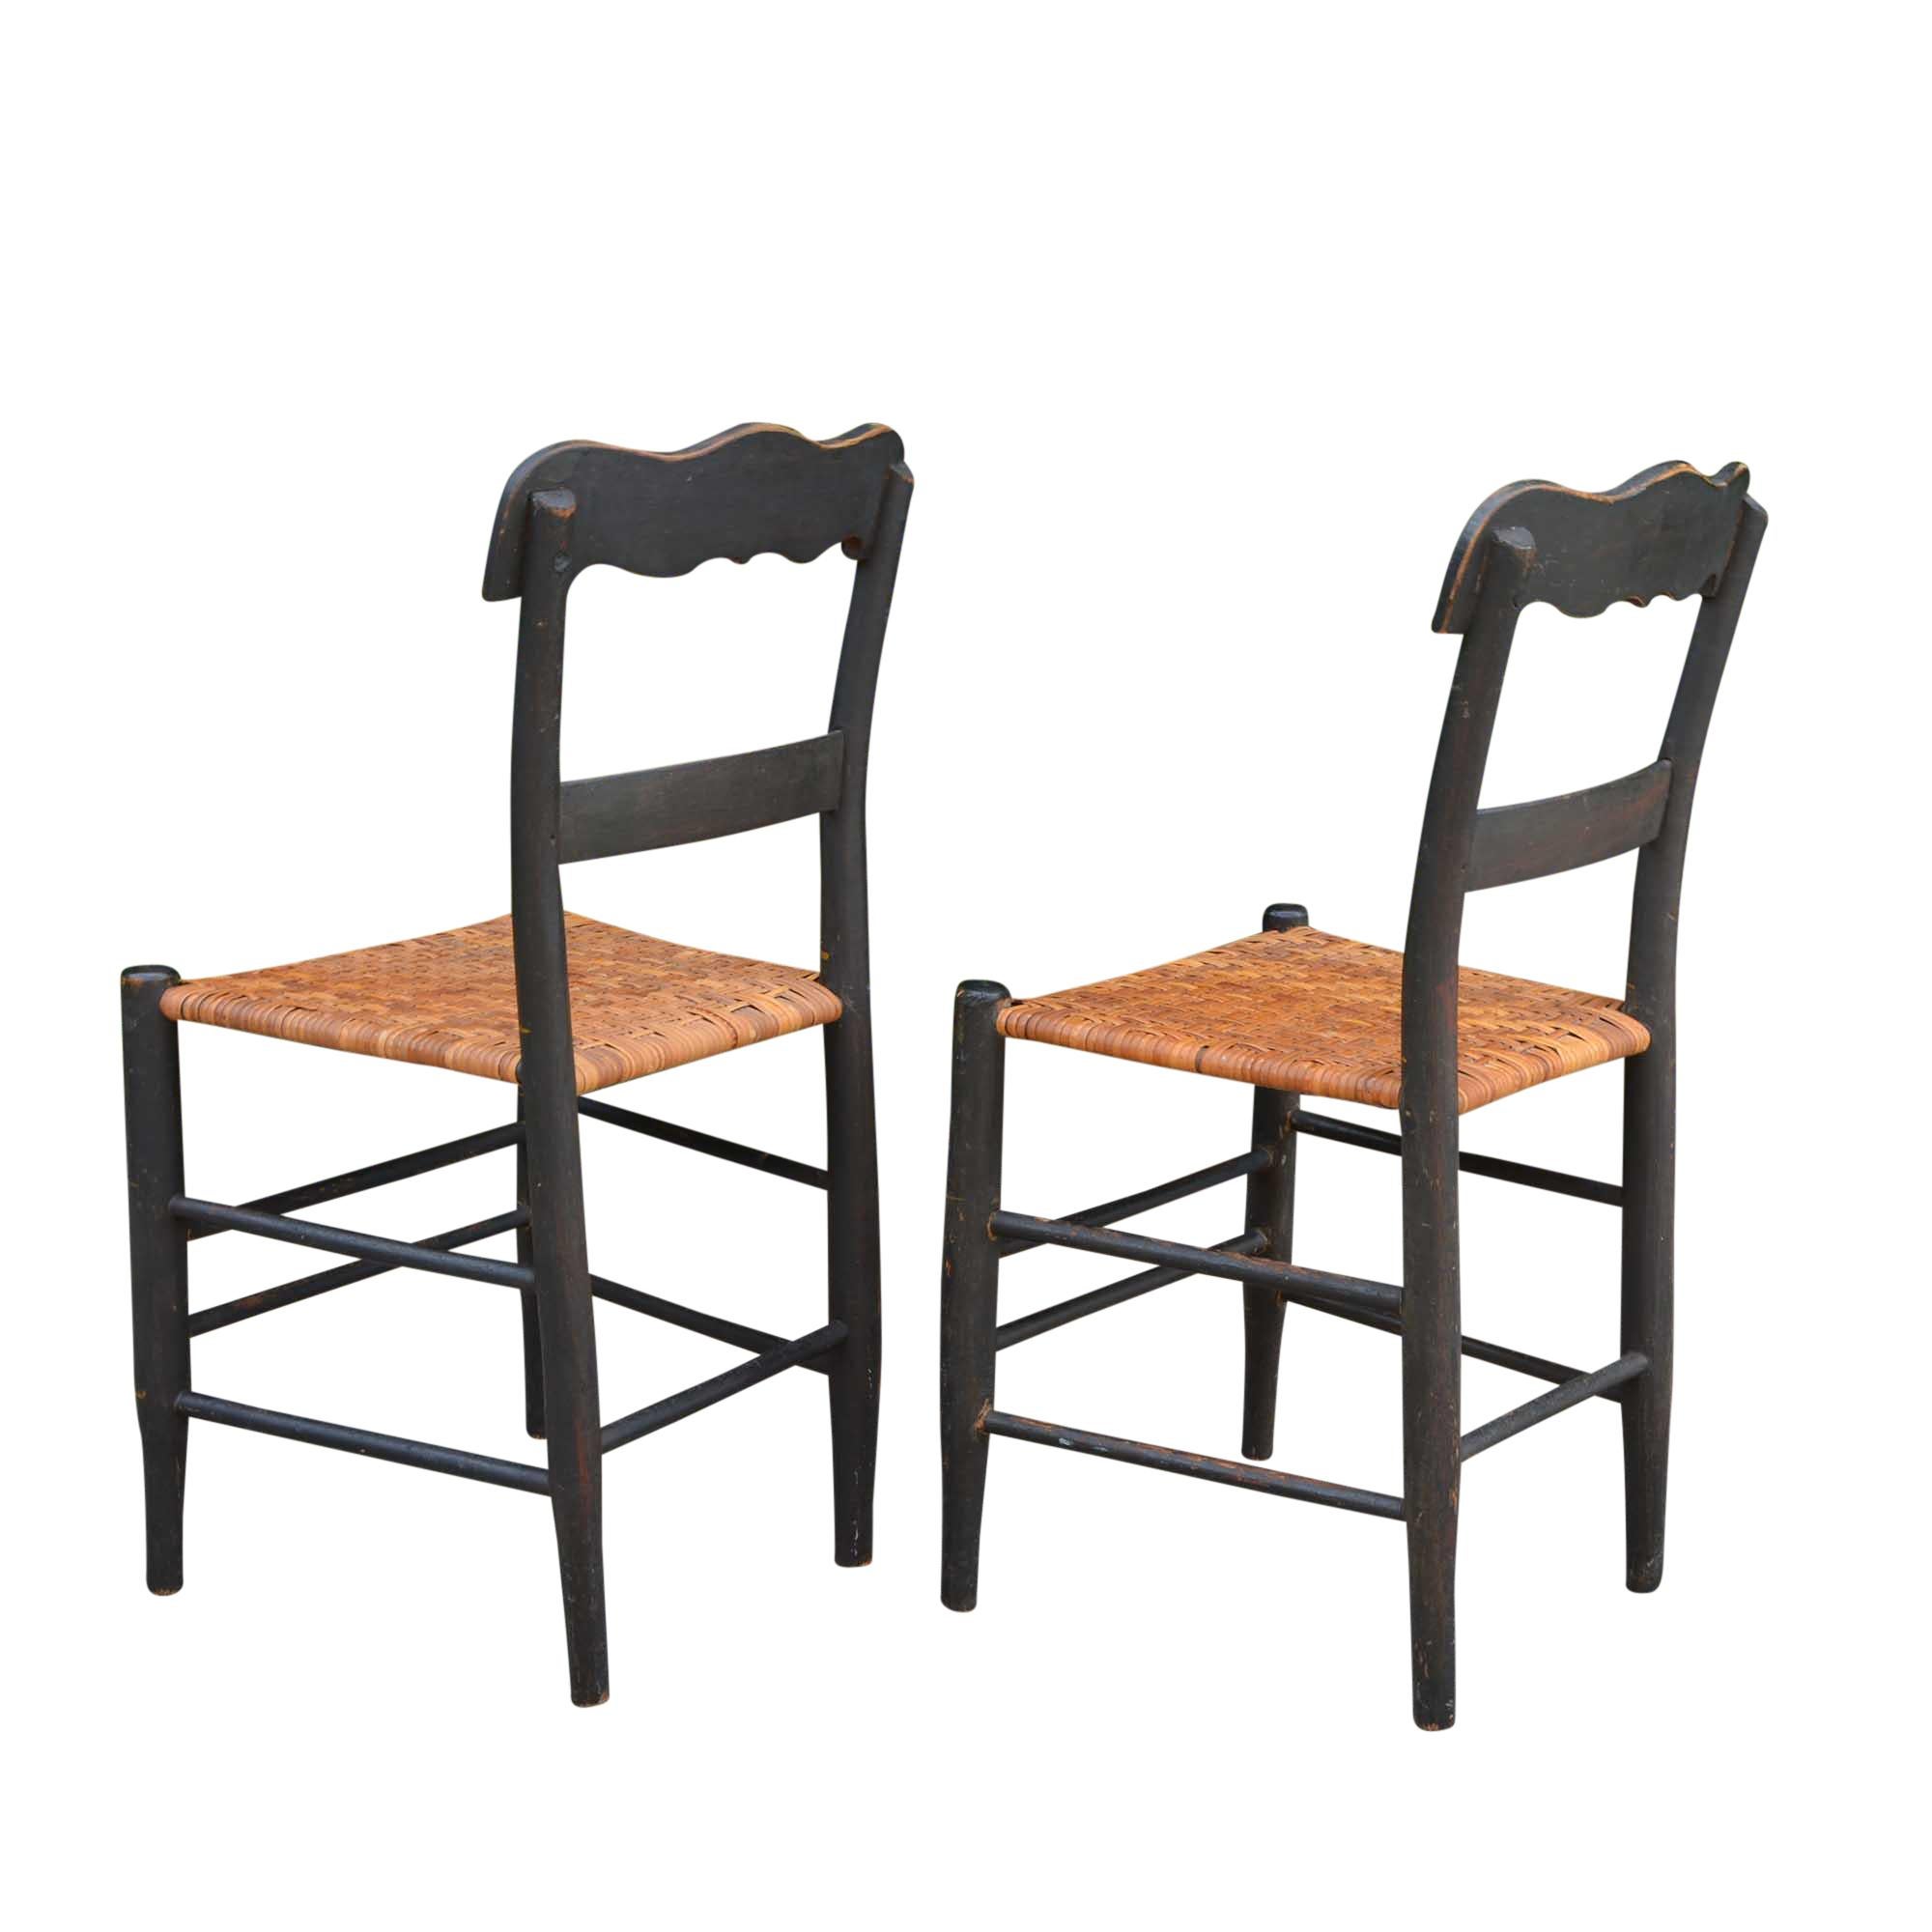 Antique American Country Sheraton Cane Seat Chairs Pair In Fair Condition For Sale In Pataskala, OH